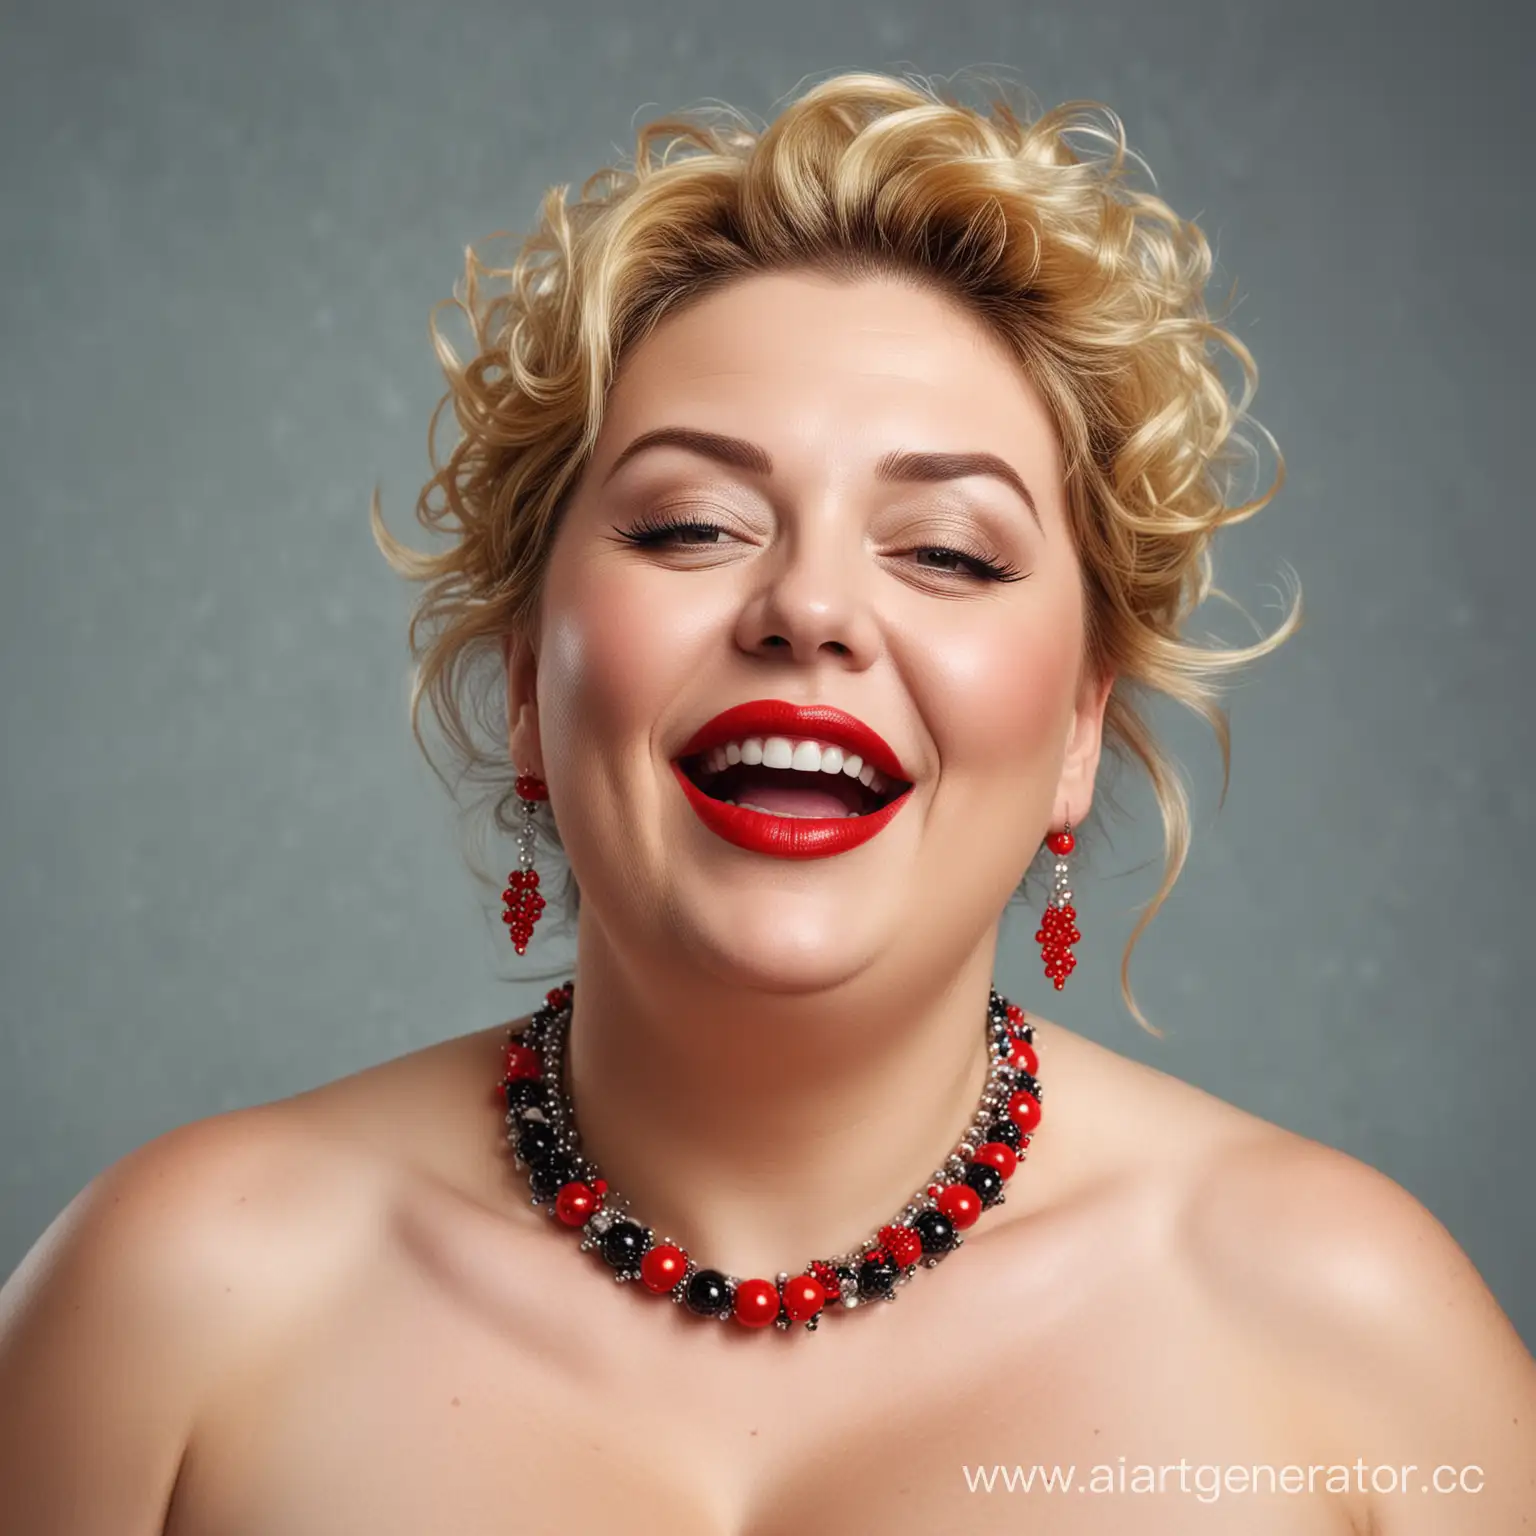 Laughing-MiddleAged-Woman-Embracing-Vintage-Fashion-with-Red-Lips-and-Beaded-Necklace